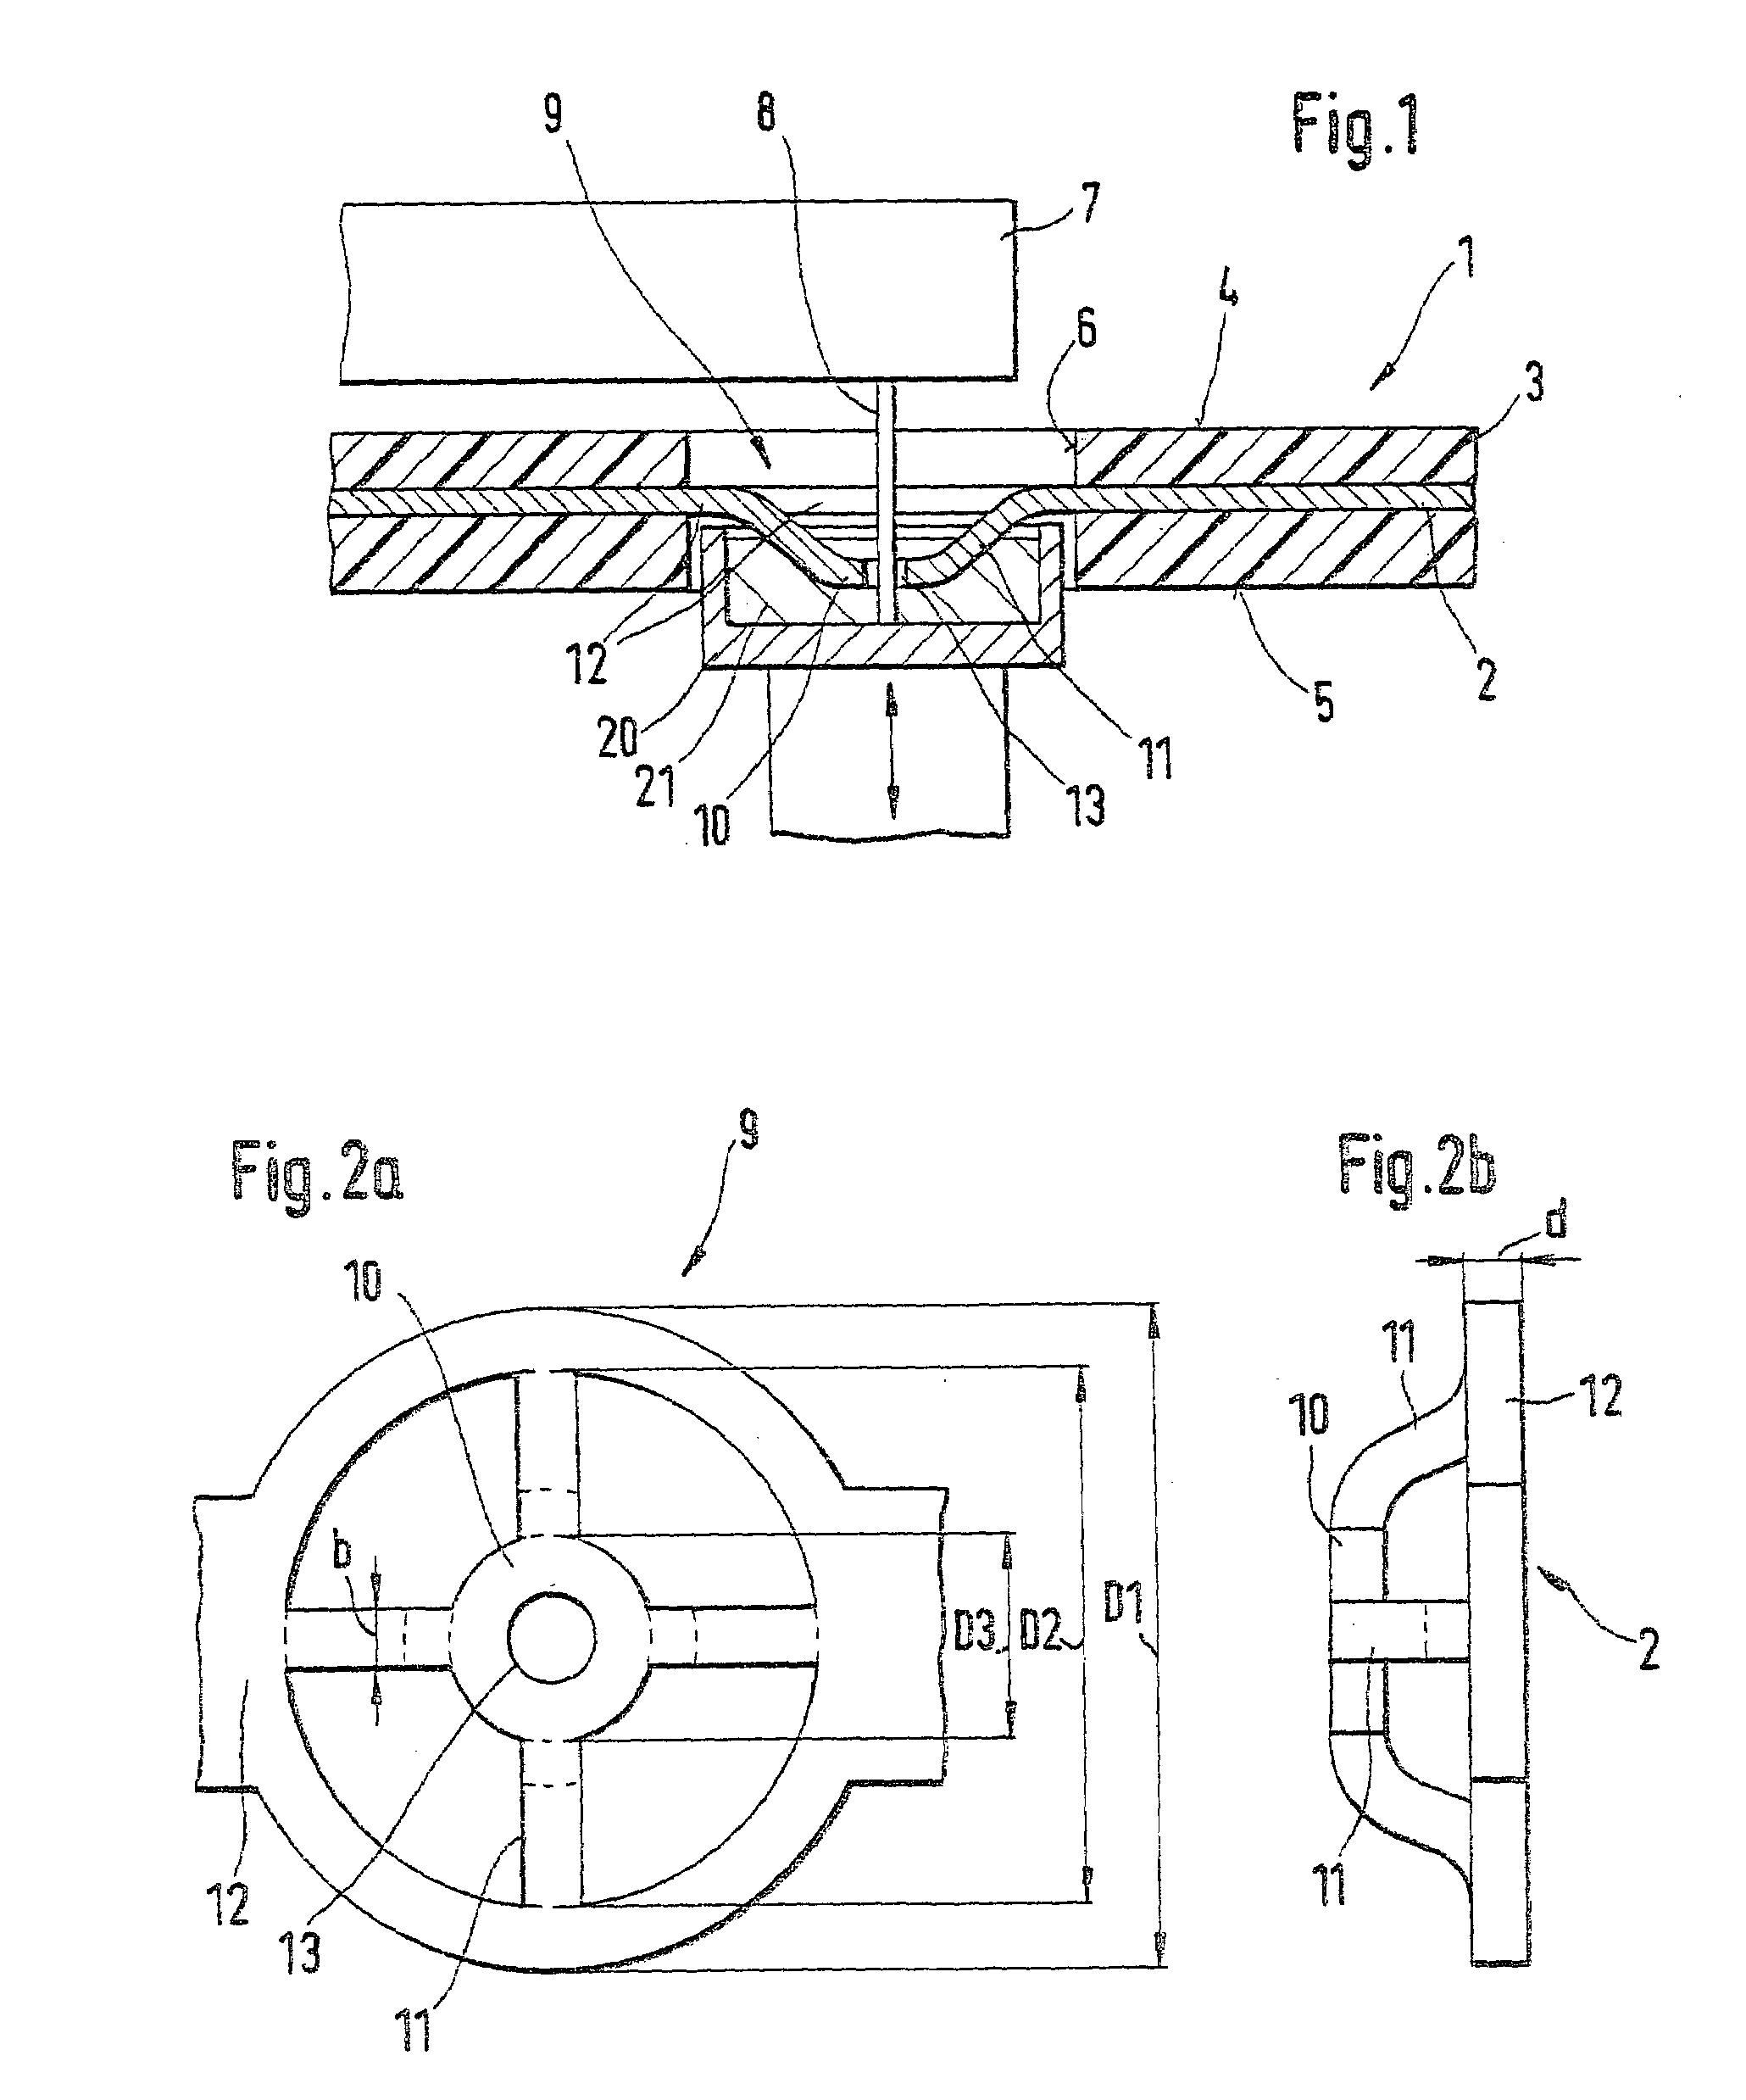 Module support for electrical/electronic components